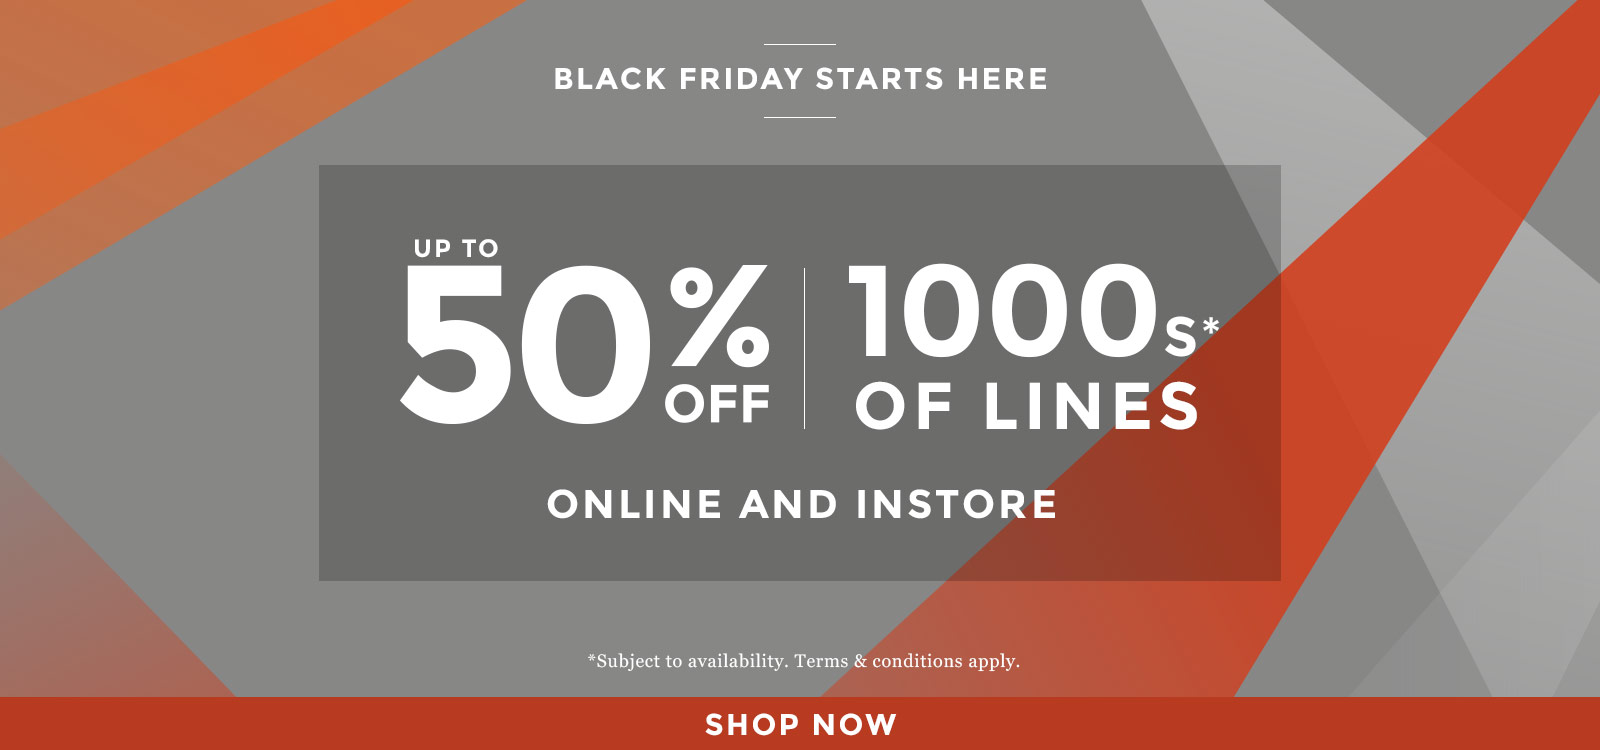 Black Friday Burton: up to 50% off 1000s of lines